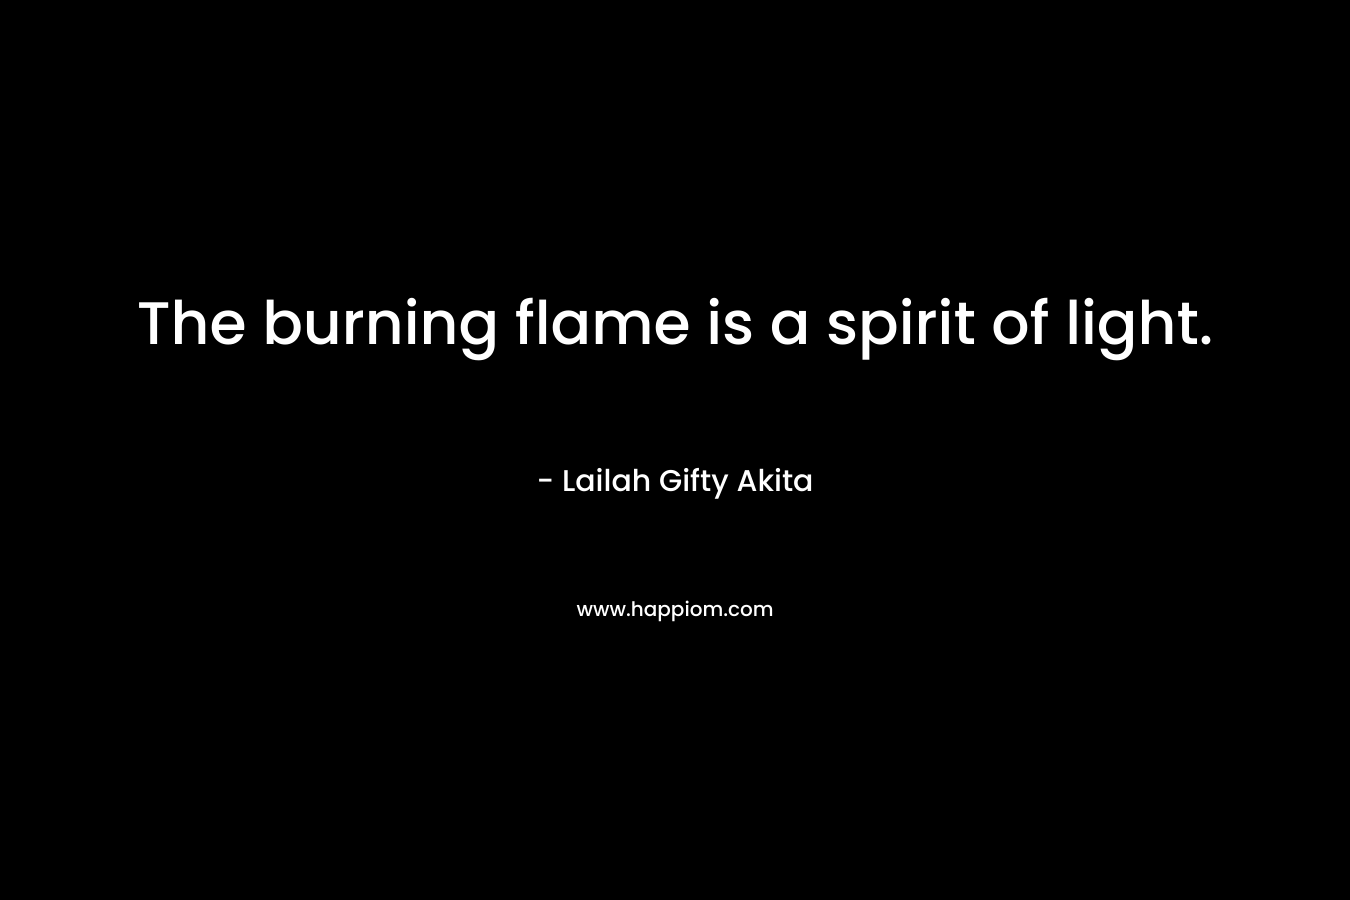 The burning flame is a spirit of light.